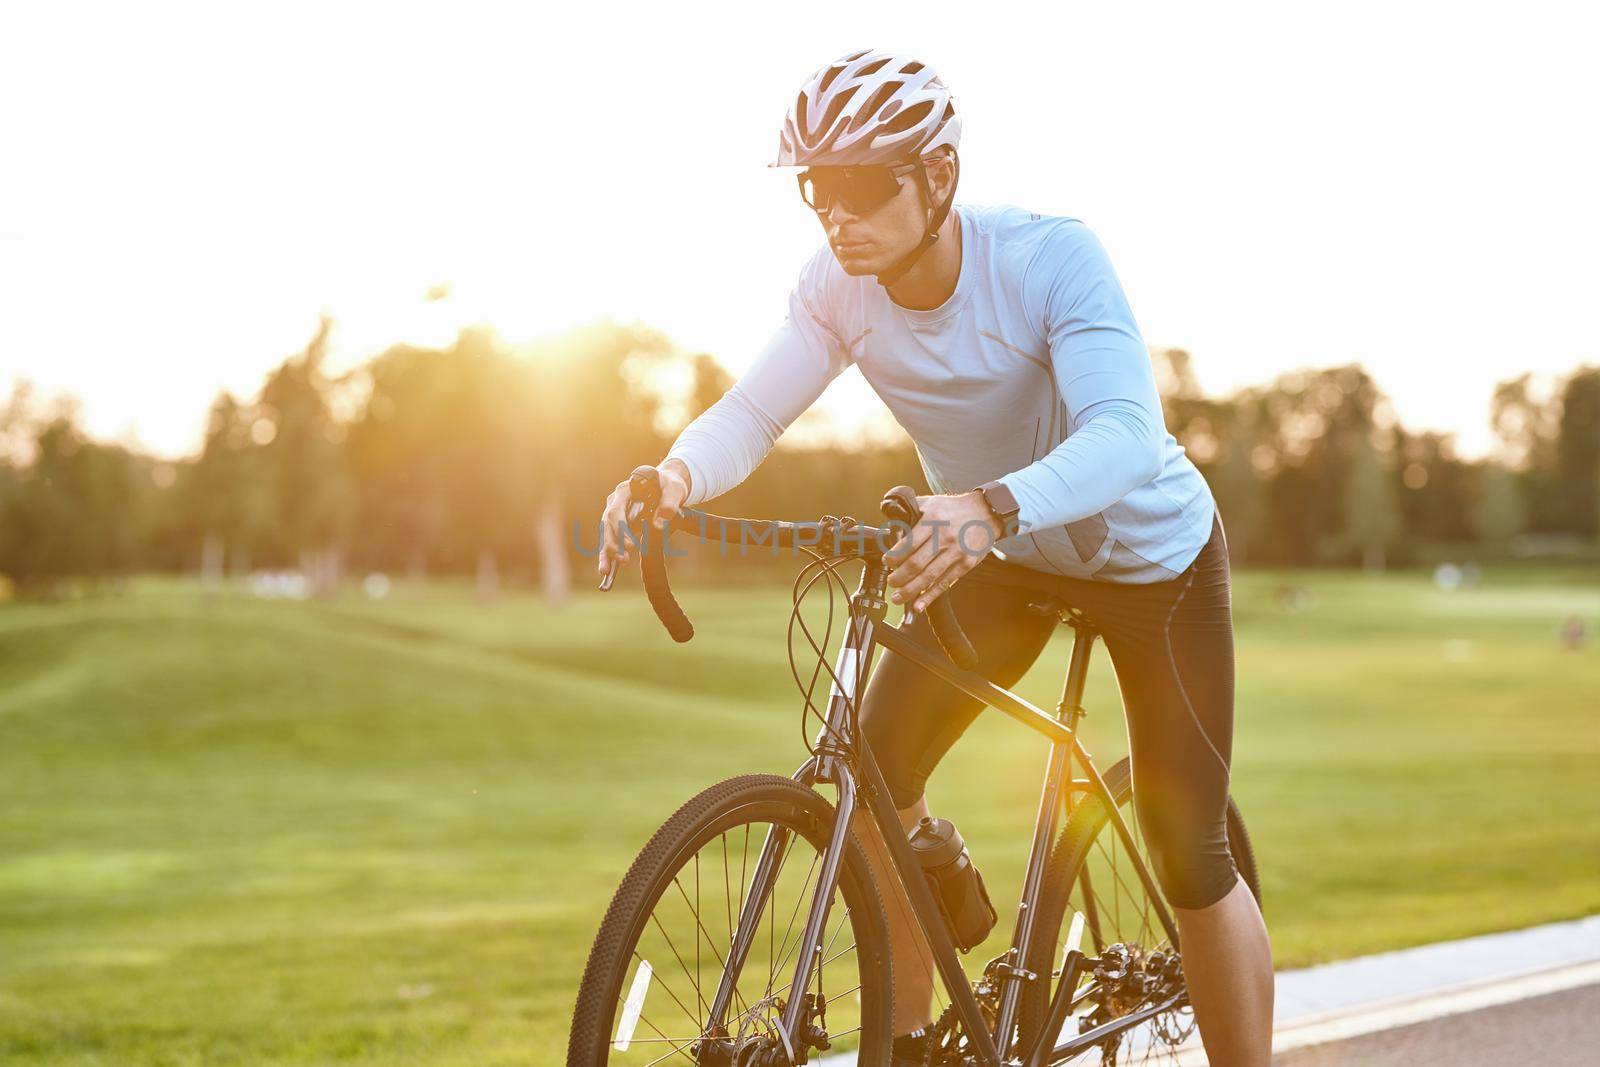 Professional road bicycle racer in sportswear and protective helmet standing on the road at sunset, ready to ride. Man cycling in the park. Active lifestyle and sport